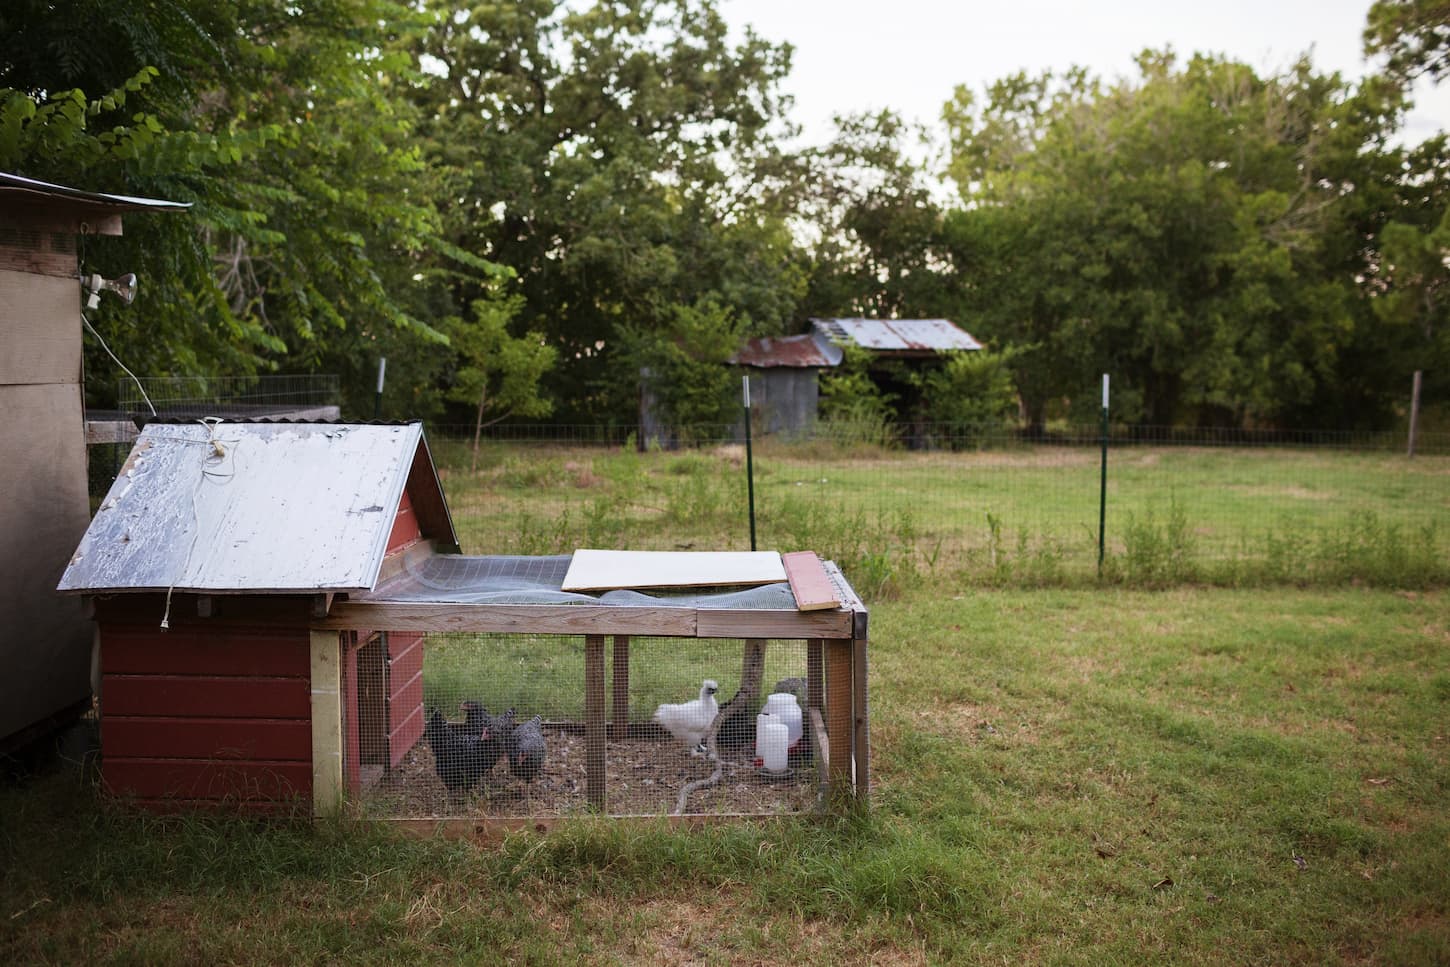 An image of chicken in coop on field.